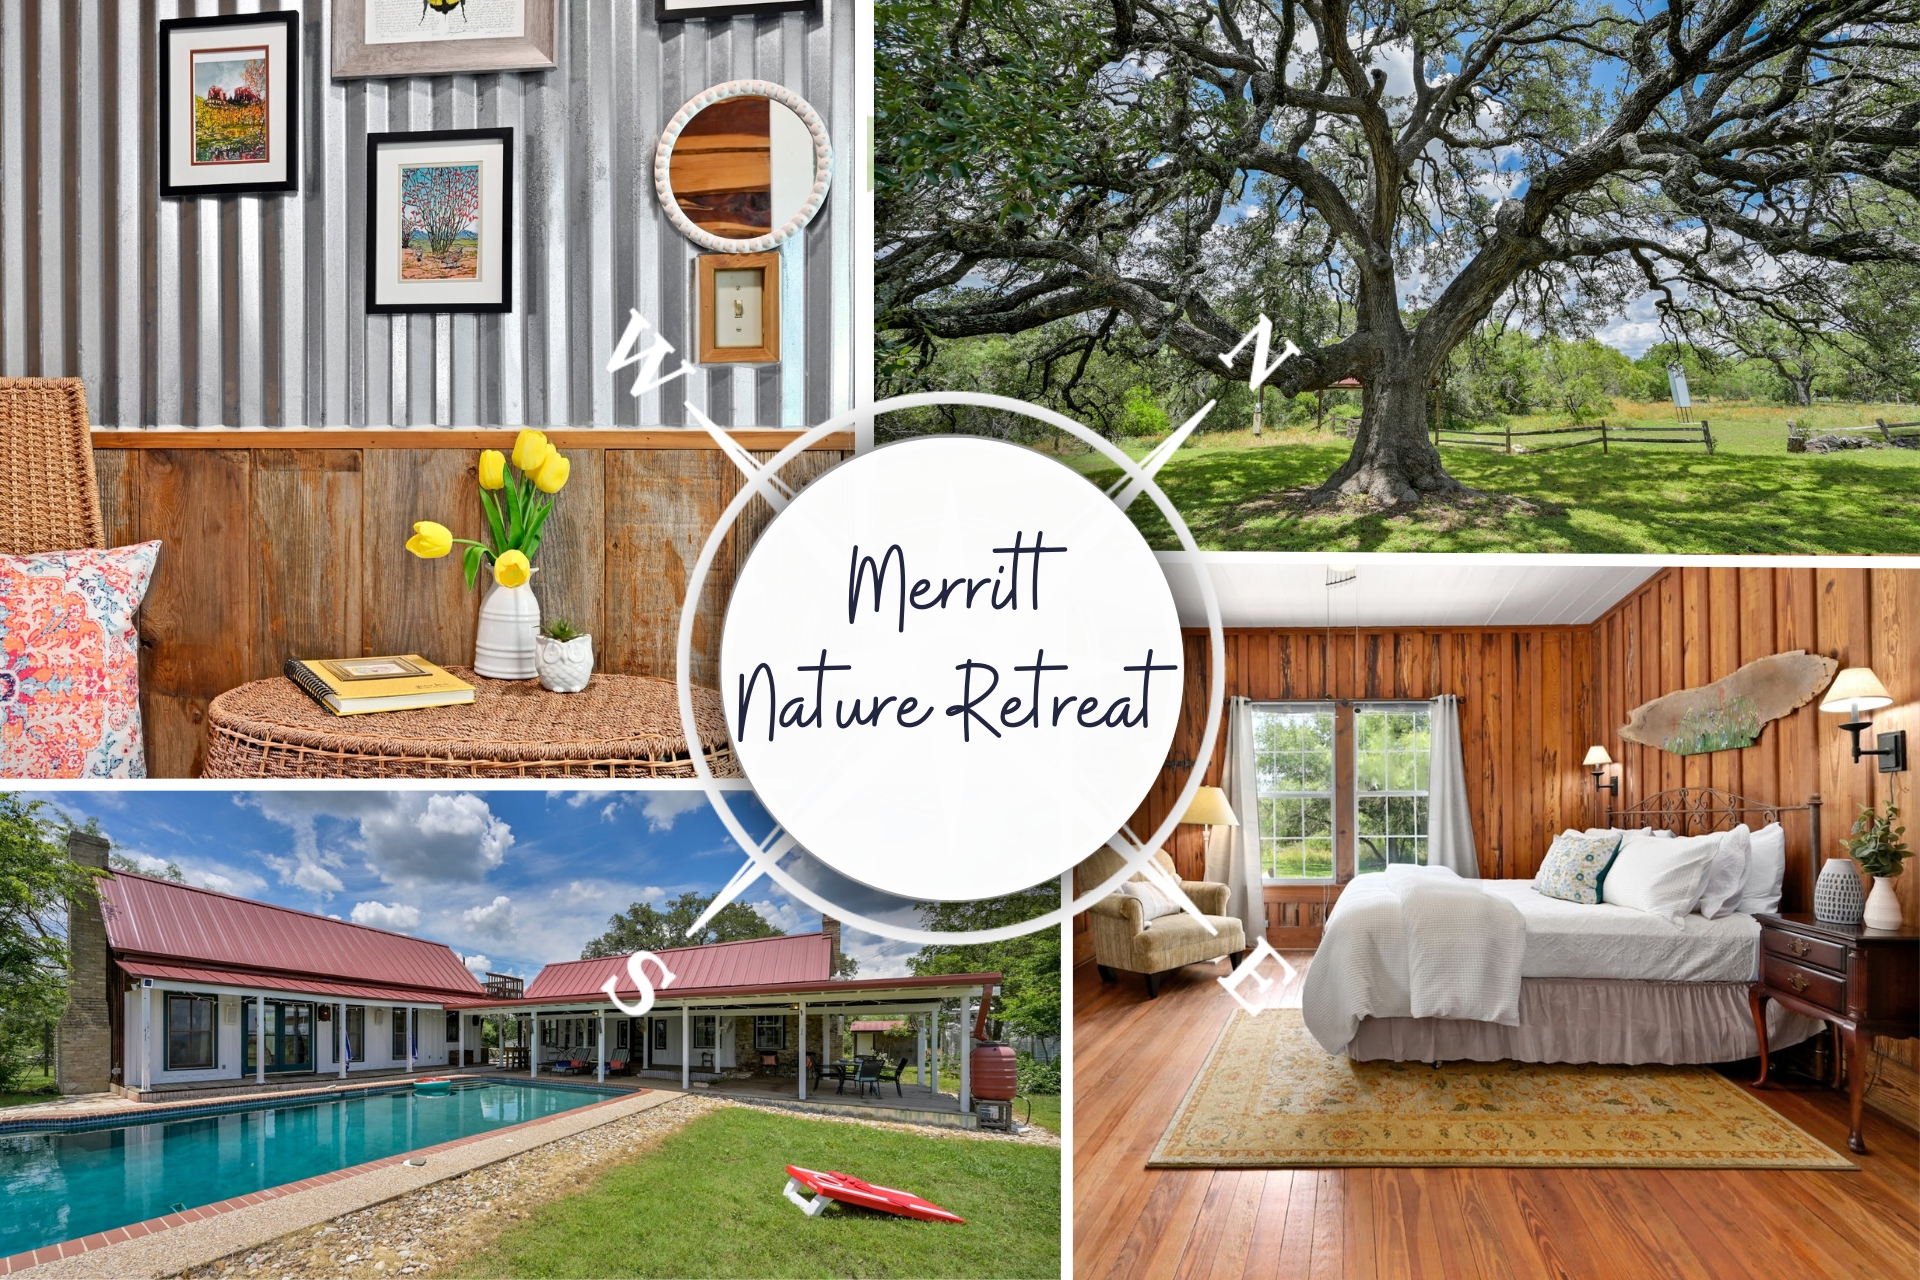 NEW 'Merritt Nature Retreat' - Secluded Hill Country Getaway with a Refreshing Pool! - 3BR/3BA